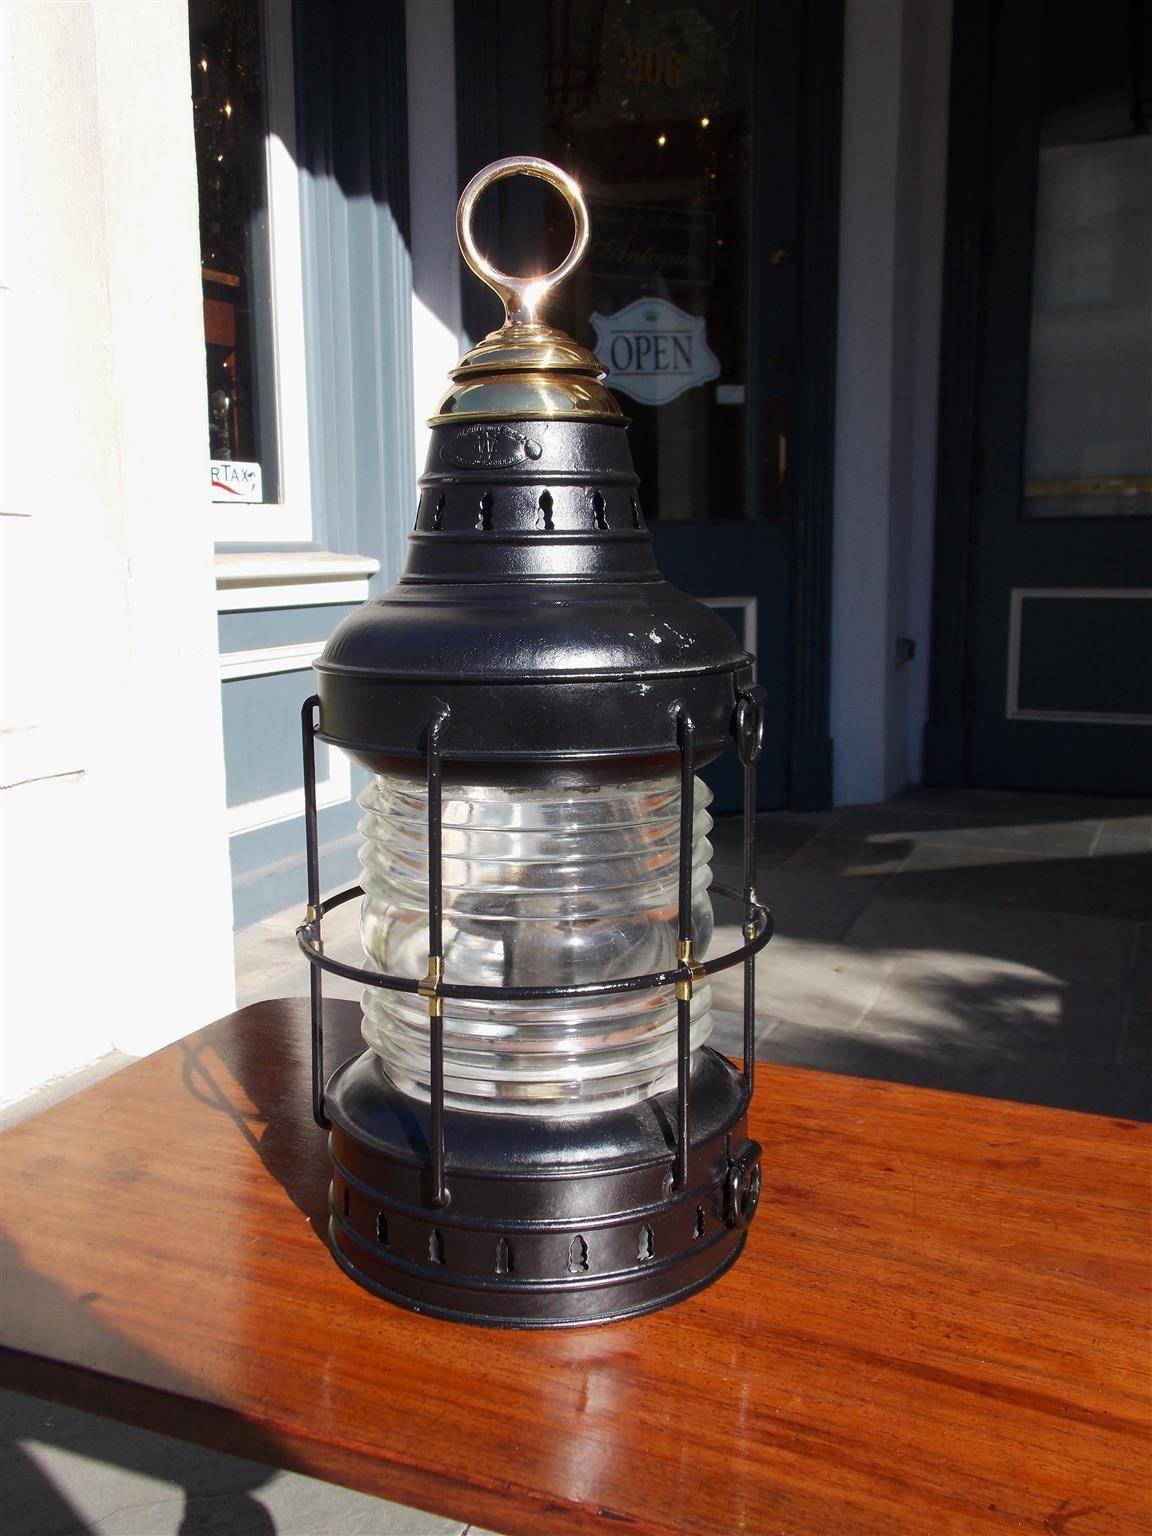 American Polished Steel and Brass Single Anchor Lantern, Circa 1880 In Excellent Condition For Sale In Hollywood, SC